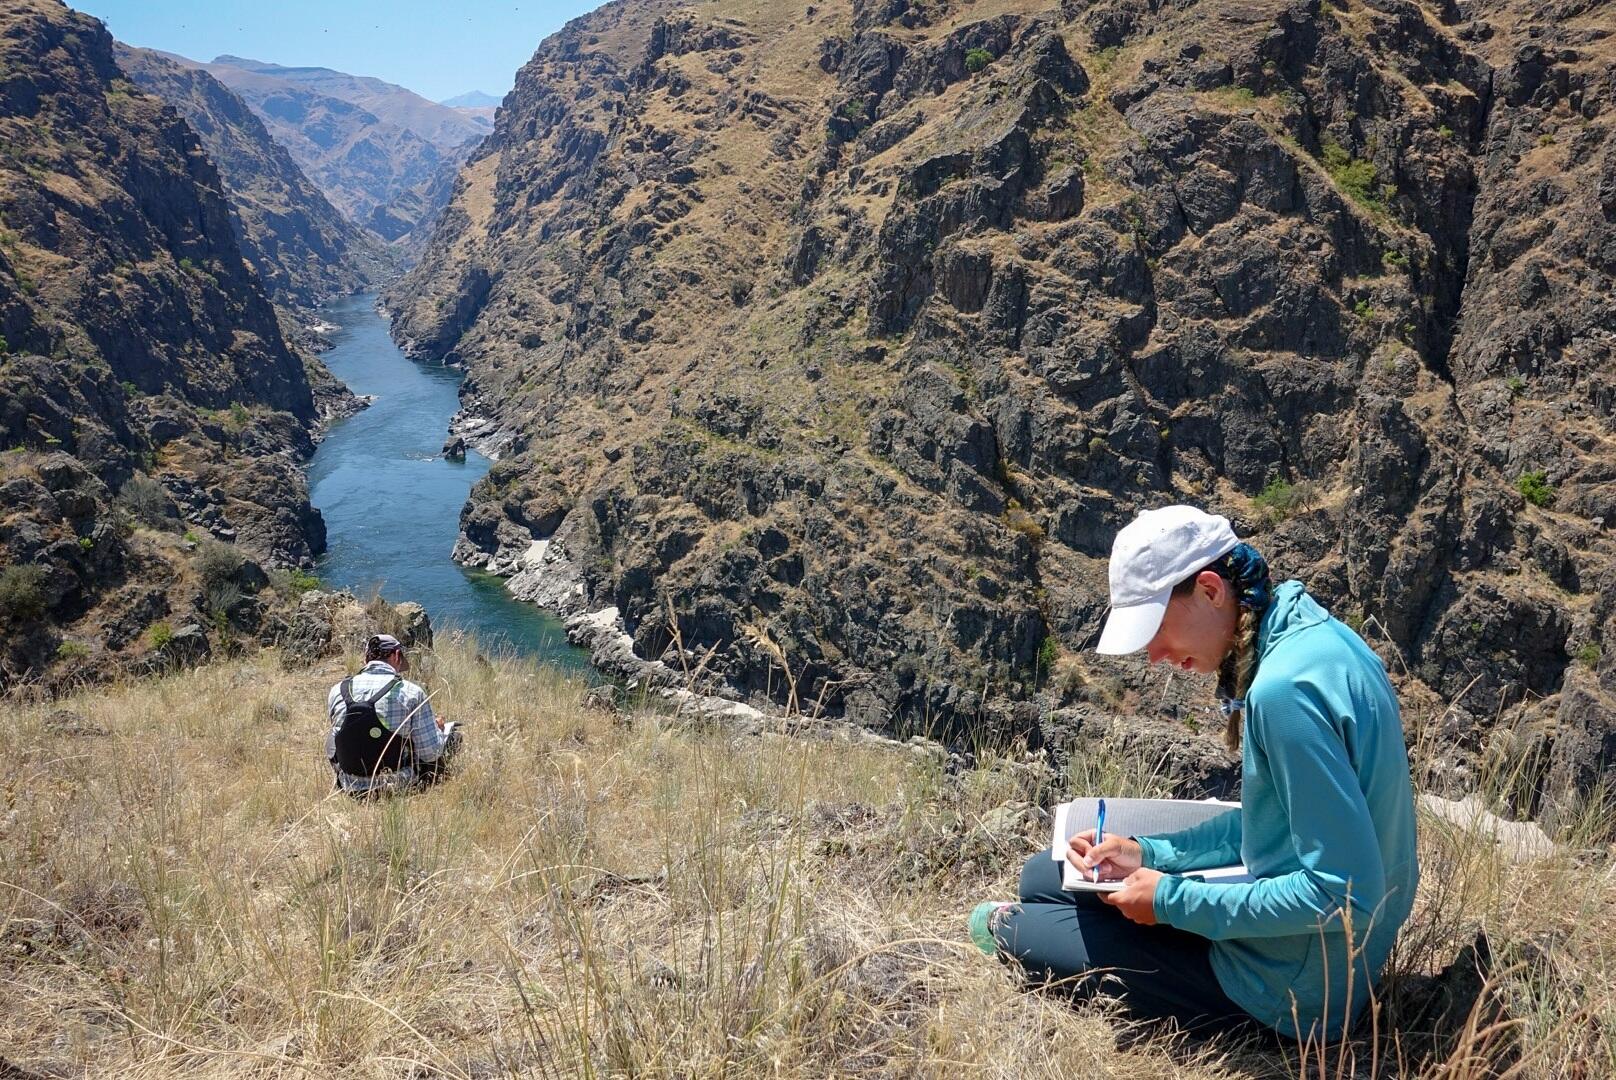 Two students seated on a bluff overlooking a river valley.